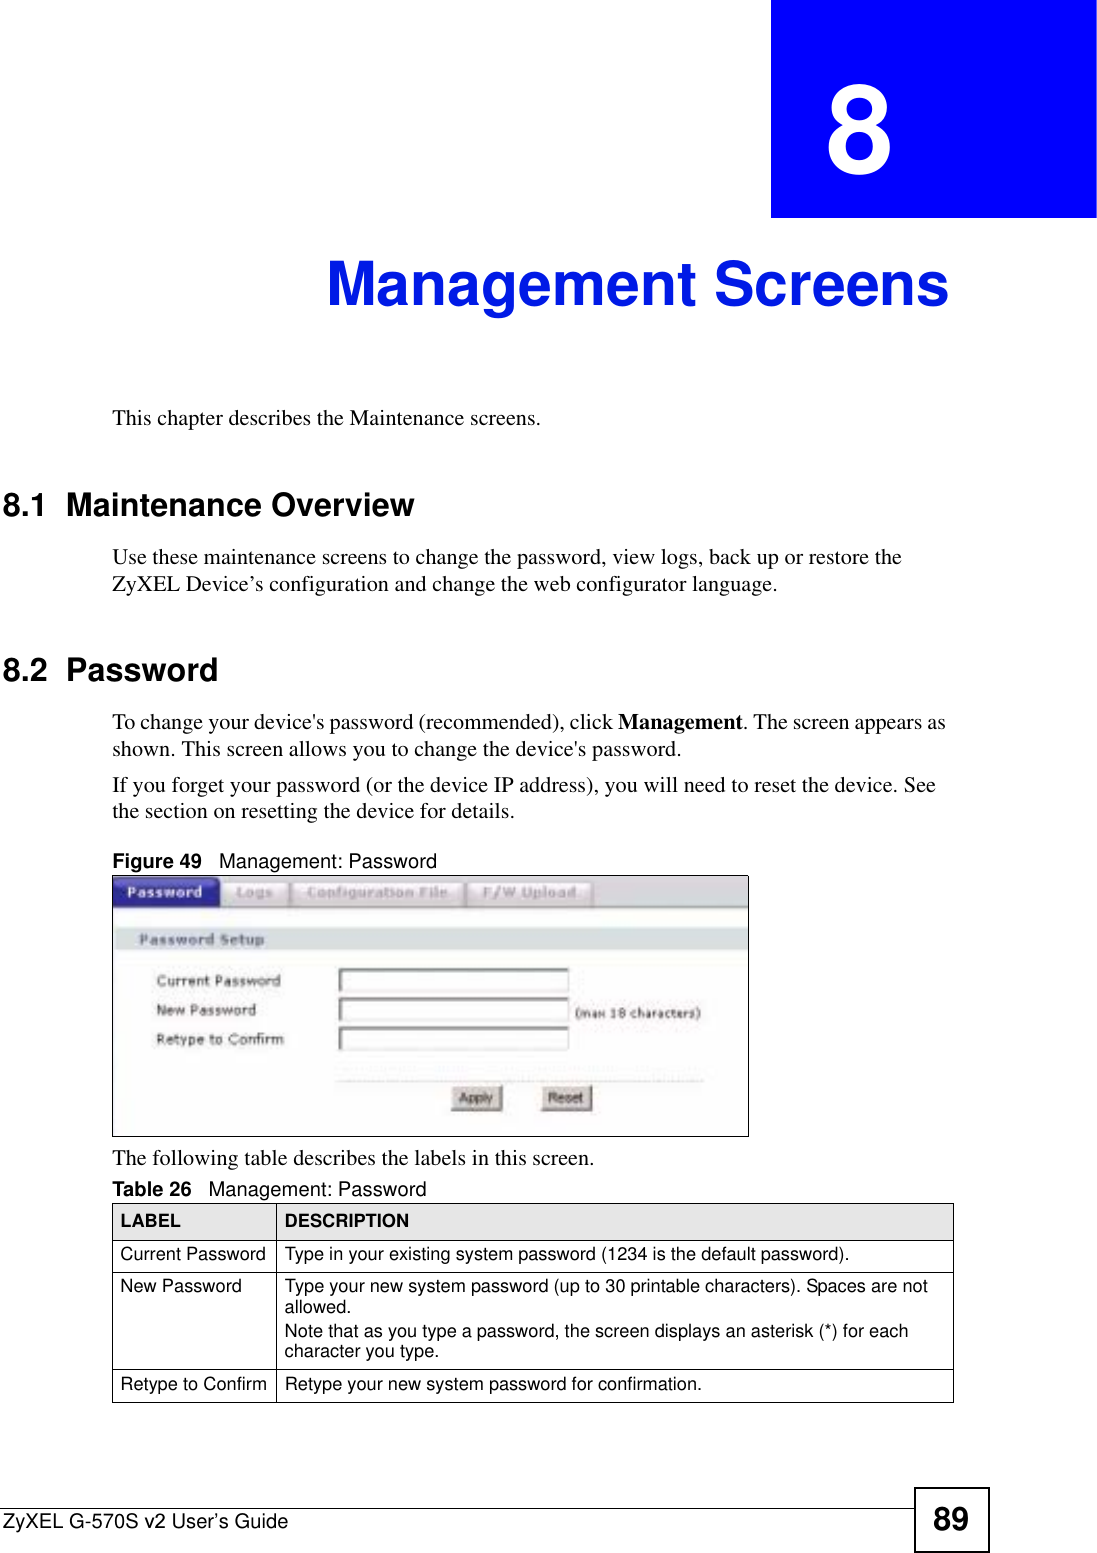 ZyXEL G-570S v2 User’s Guide 89CHAPTER  8 Management ScreensThis chapter describes the Maintenance screens.8.1  Maintenance OverviewUse these maintenance screens to change the password, view logs, back up or restore the ZyXEL Device’s configuration and change the web configurator language. 8.2  Password To change your device&apos;s password (recommended), click Management. The screen appears as shown. This screen allows you to change the device&apos;s password.If you forget your password (or the device IP address), you will need to reset the device. See the section on resetting the device for details.Figure 49   Management: PasswordThe following table describes the labels in this screen. Table 26   Management: Password LABEL DESCRIPTIONCurrent Password Type in your existing system password (1234 is the default password).New Password Type your new system password (up to 30 printable characters). Spaces are not allowed.Note that as you type a password, the screen displays an asterisk (*) for each character you type.Retype to Confirm Retype your new system password for confirmation.